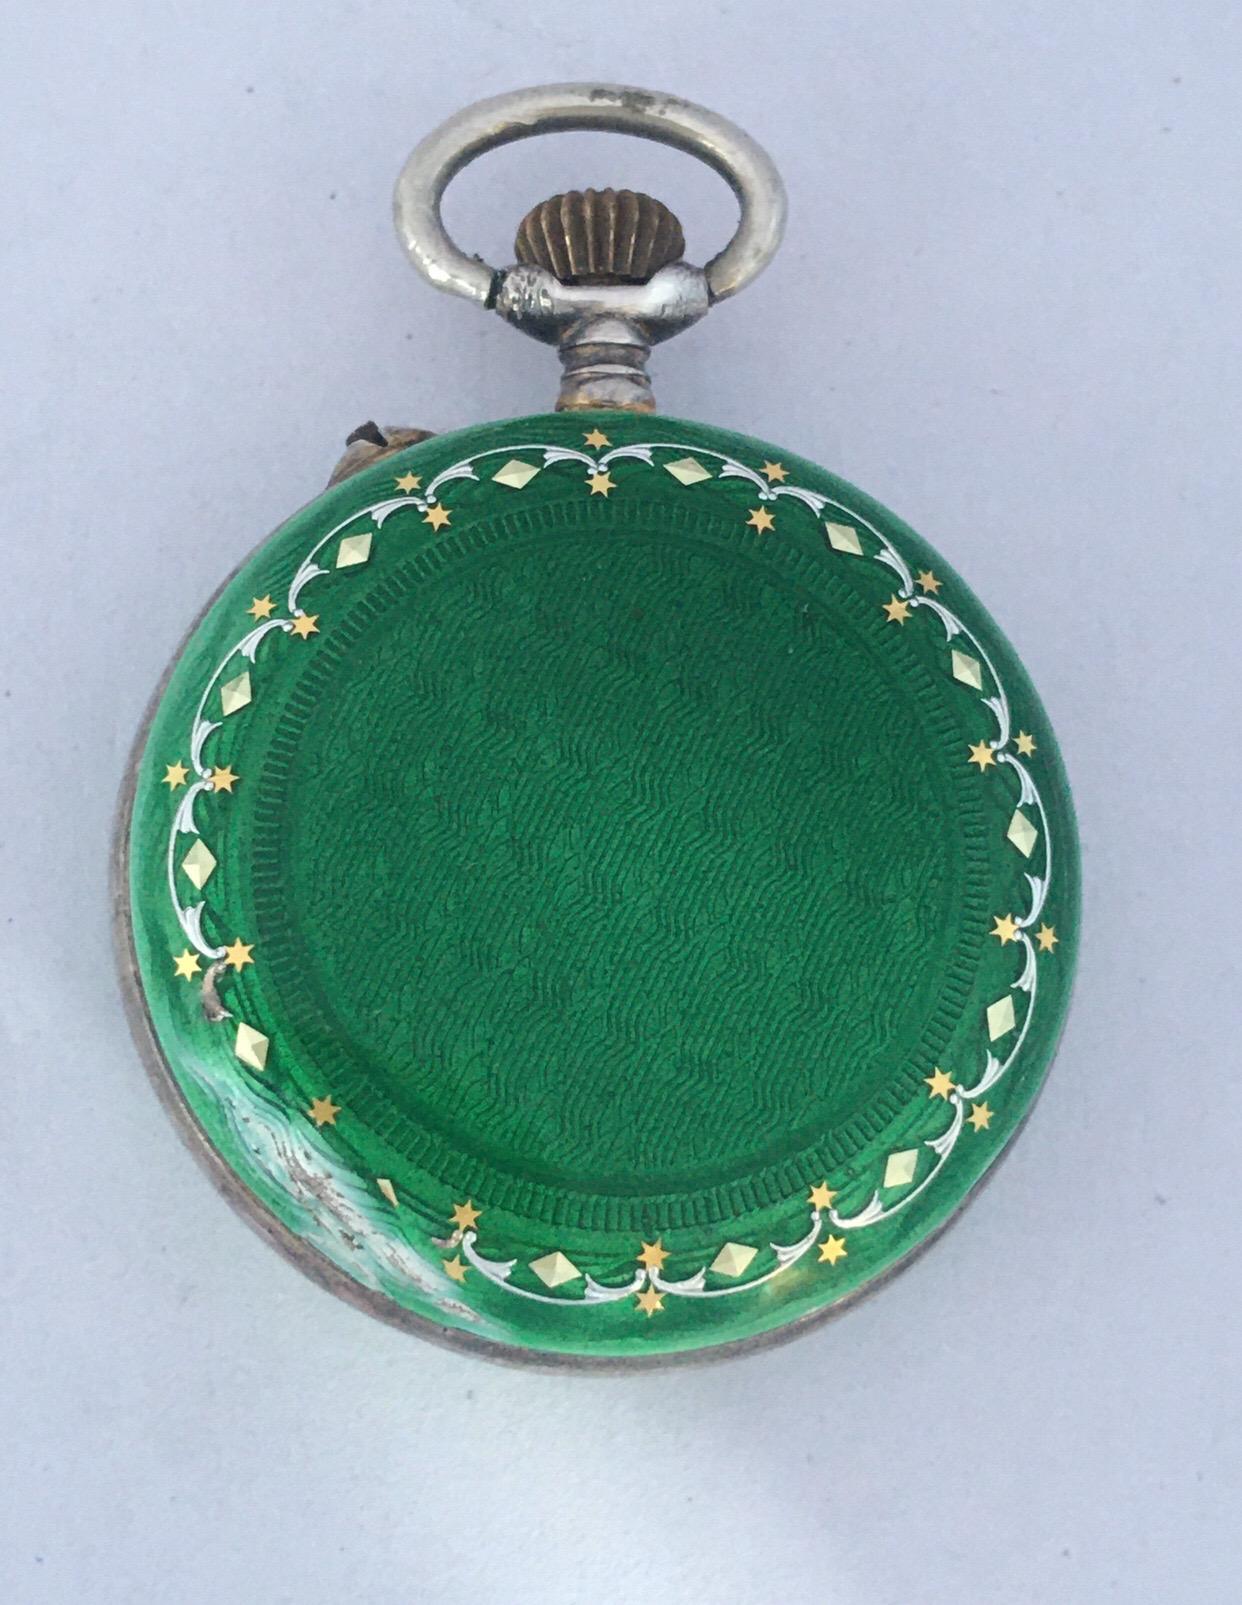 This beautiful antique 29mm diameter (excluding the crown) mechanical silver  fob watch is in good working condition and it is running well. Visible signs of ageing and wear with light surface marks on watch case as shown. Visible chip on the green